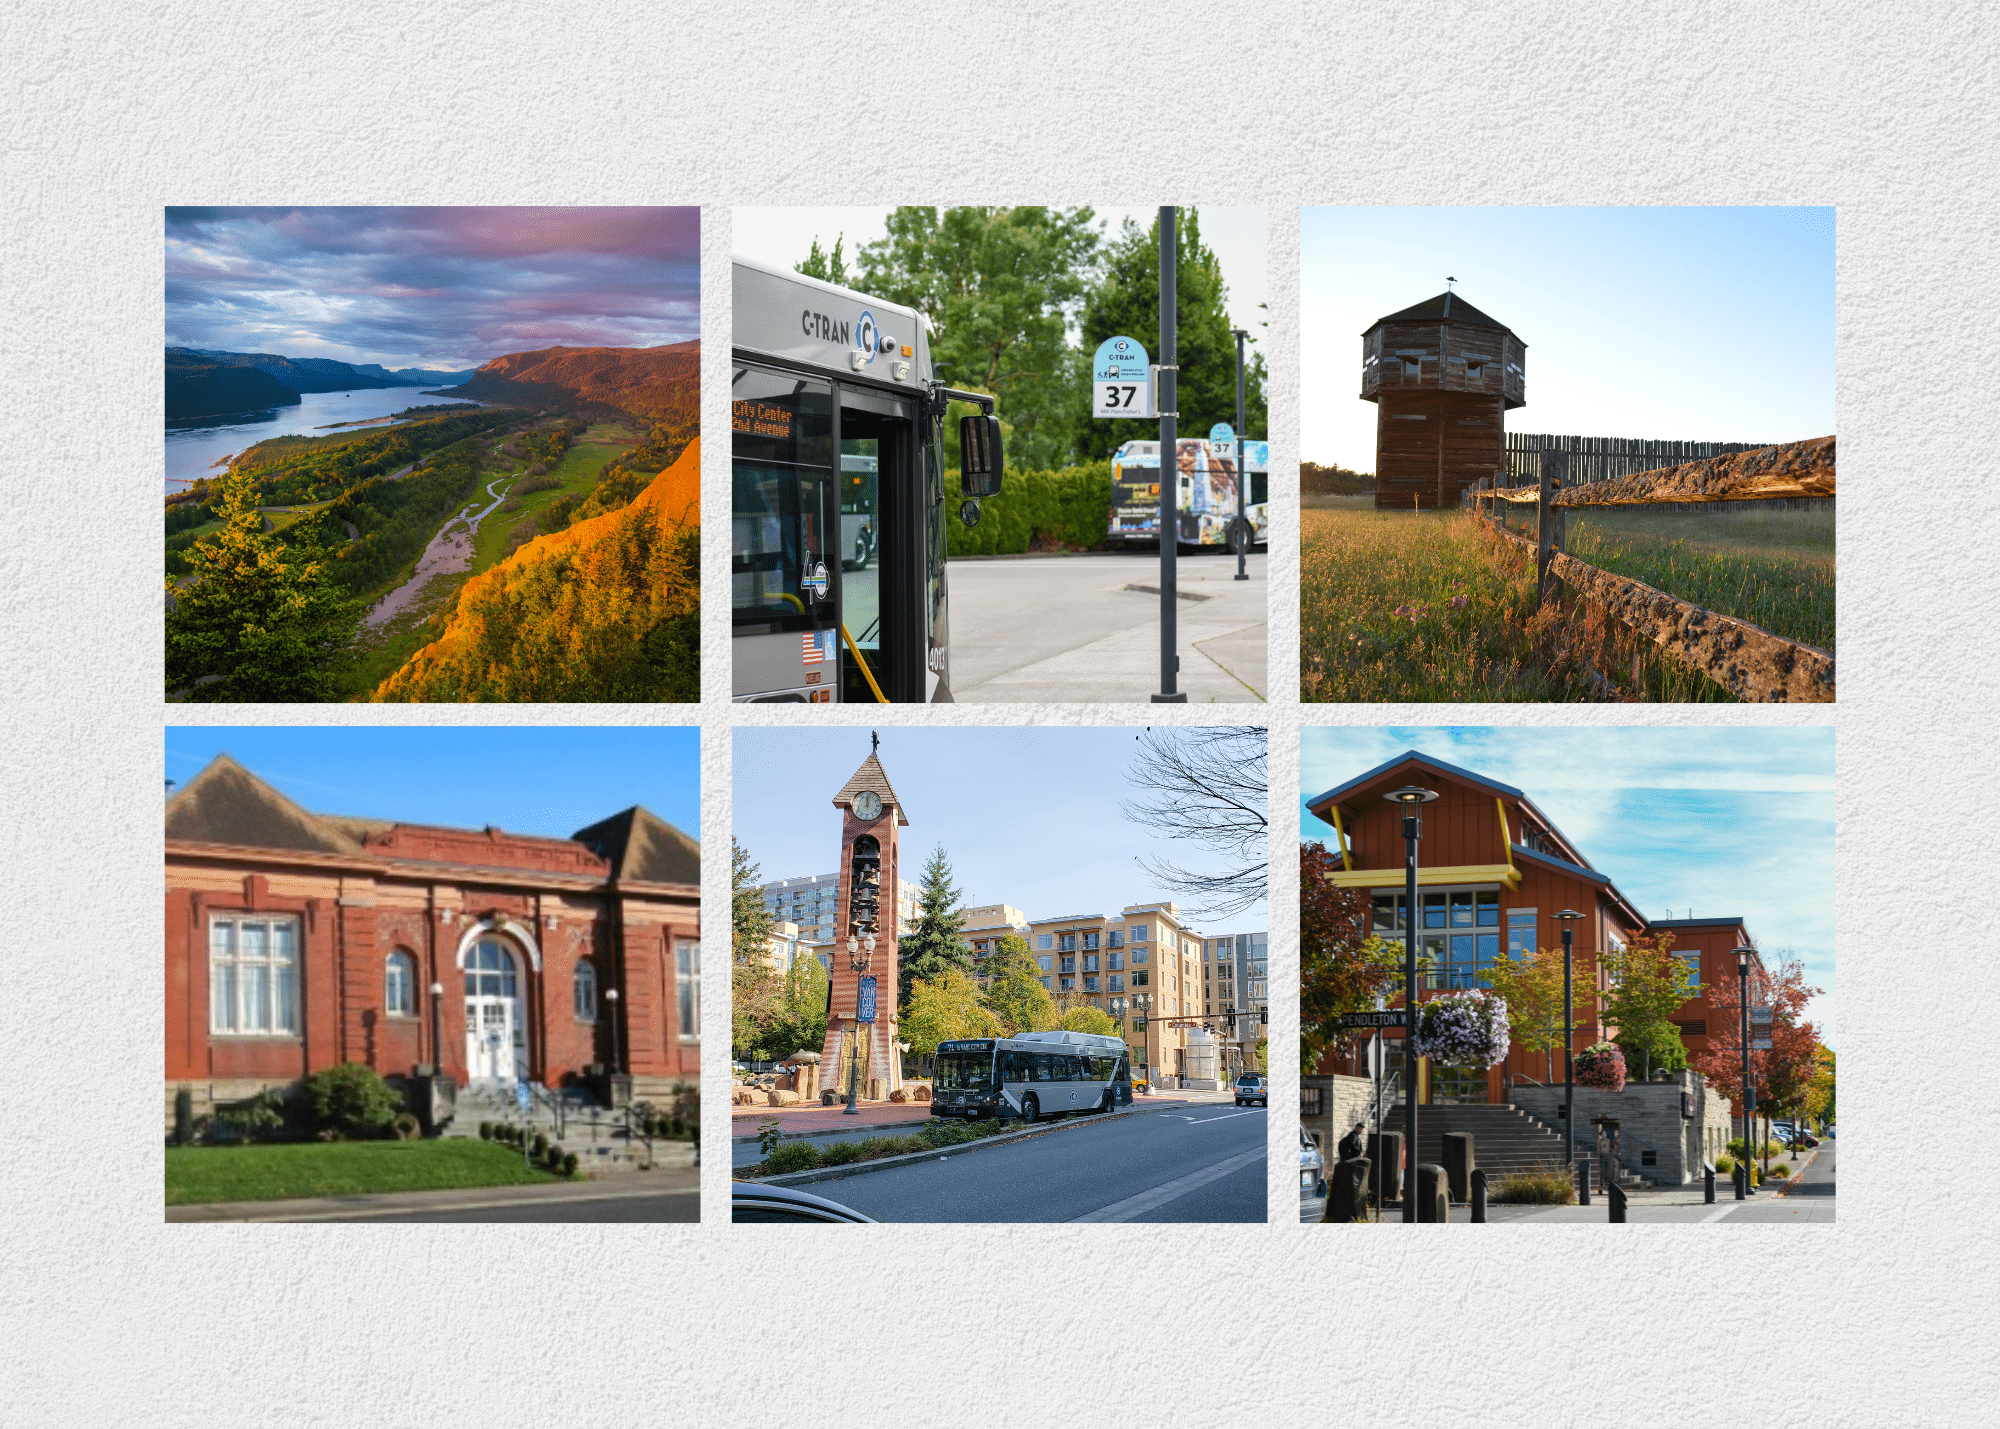 6 photos of sights and buildings throughout Southwest Washington state